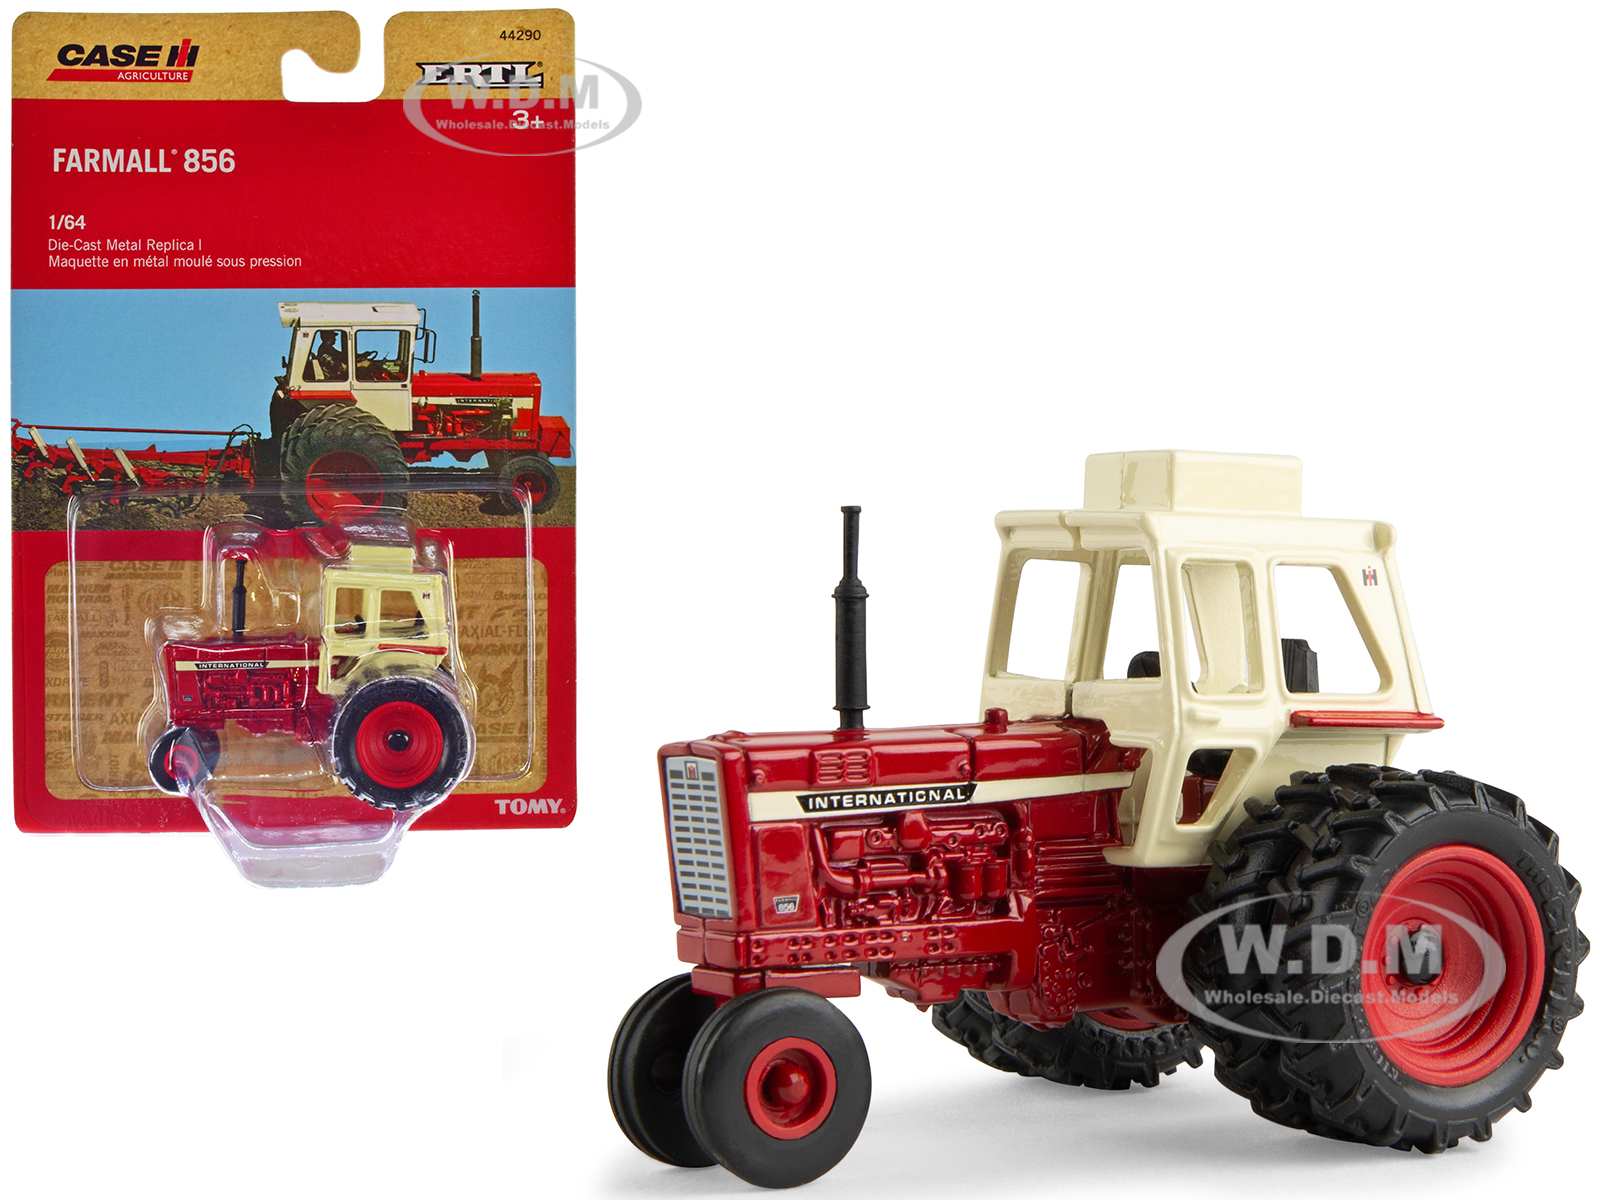 Farmall 856 Tractor Red with Cream Top with Dual Wheels "Case IH Agriculture" 1/64 Diecast Model by ERTL TOMY